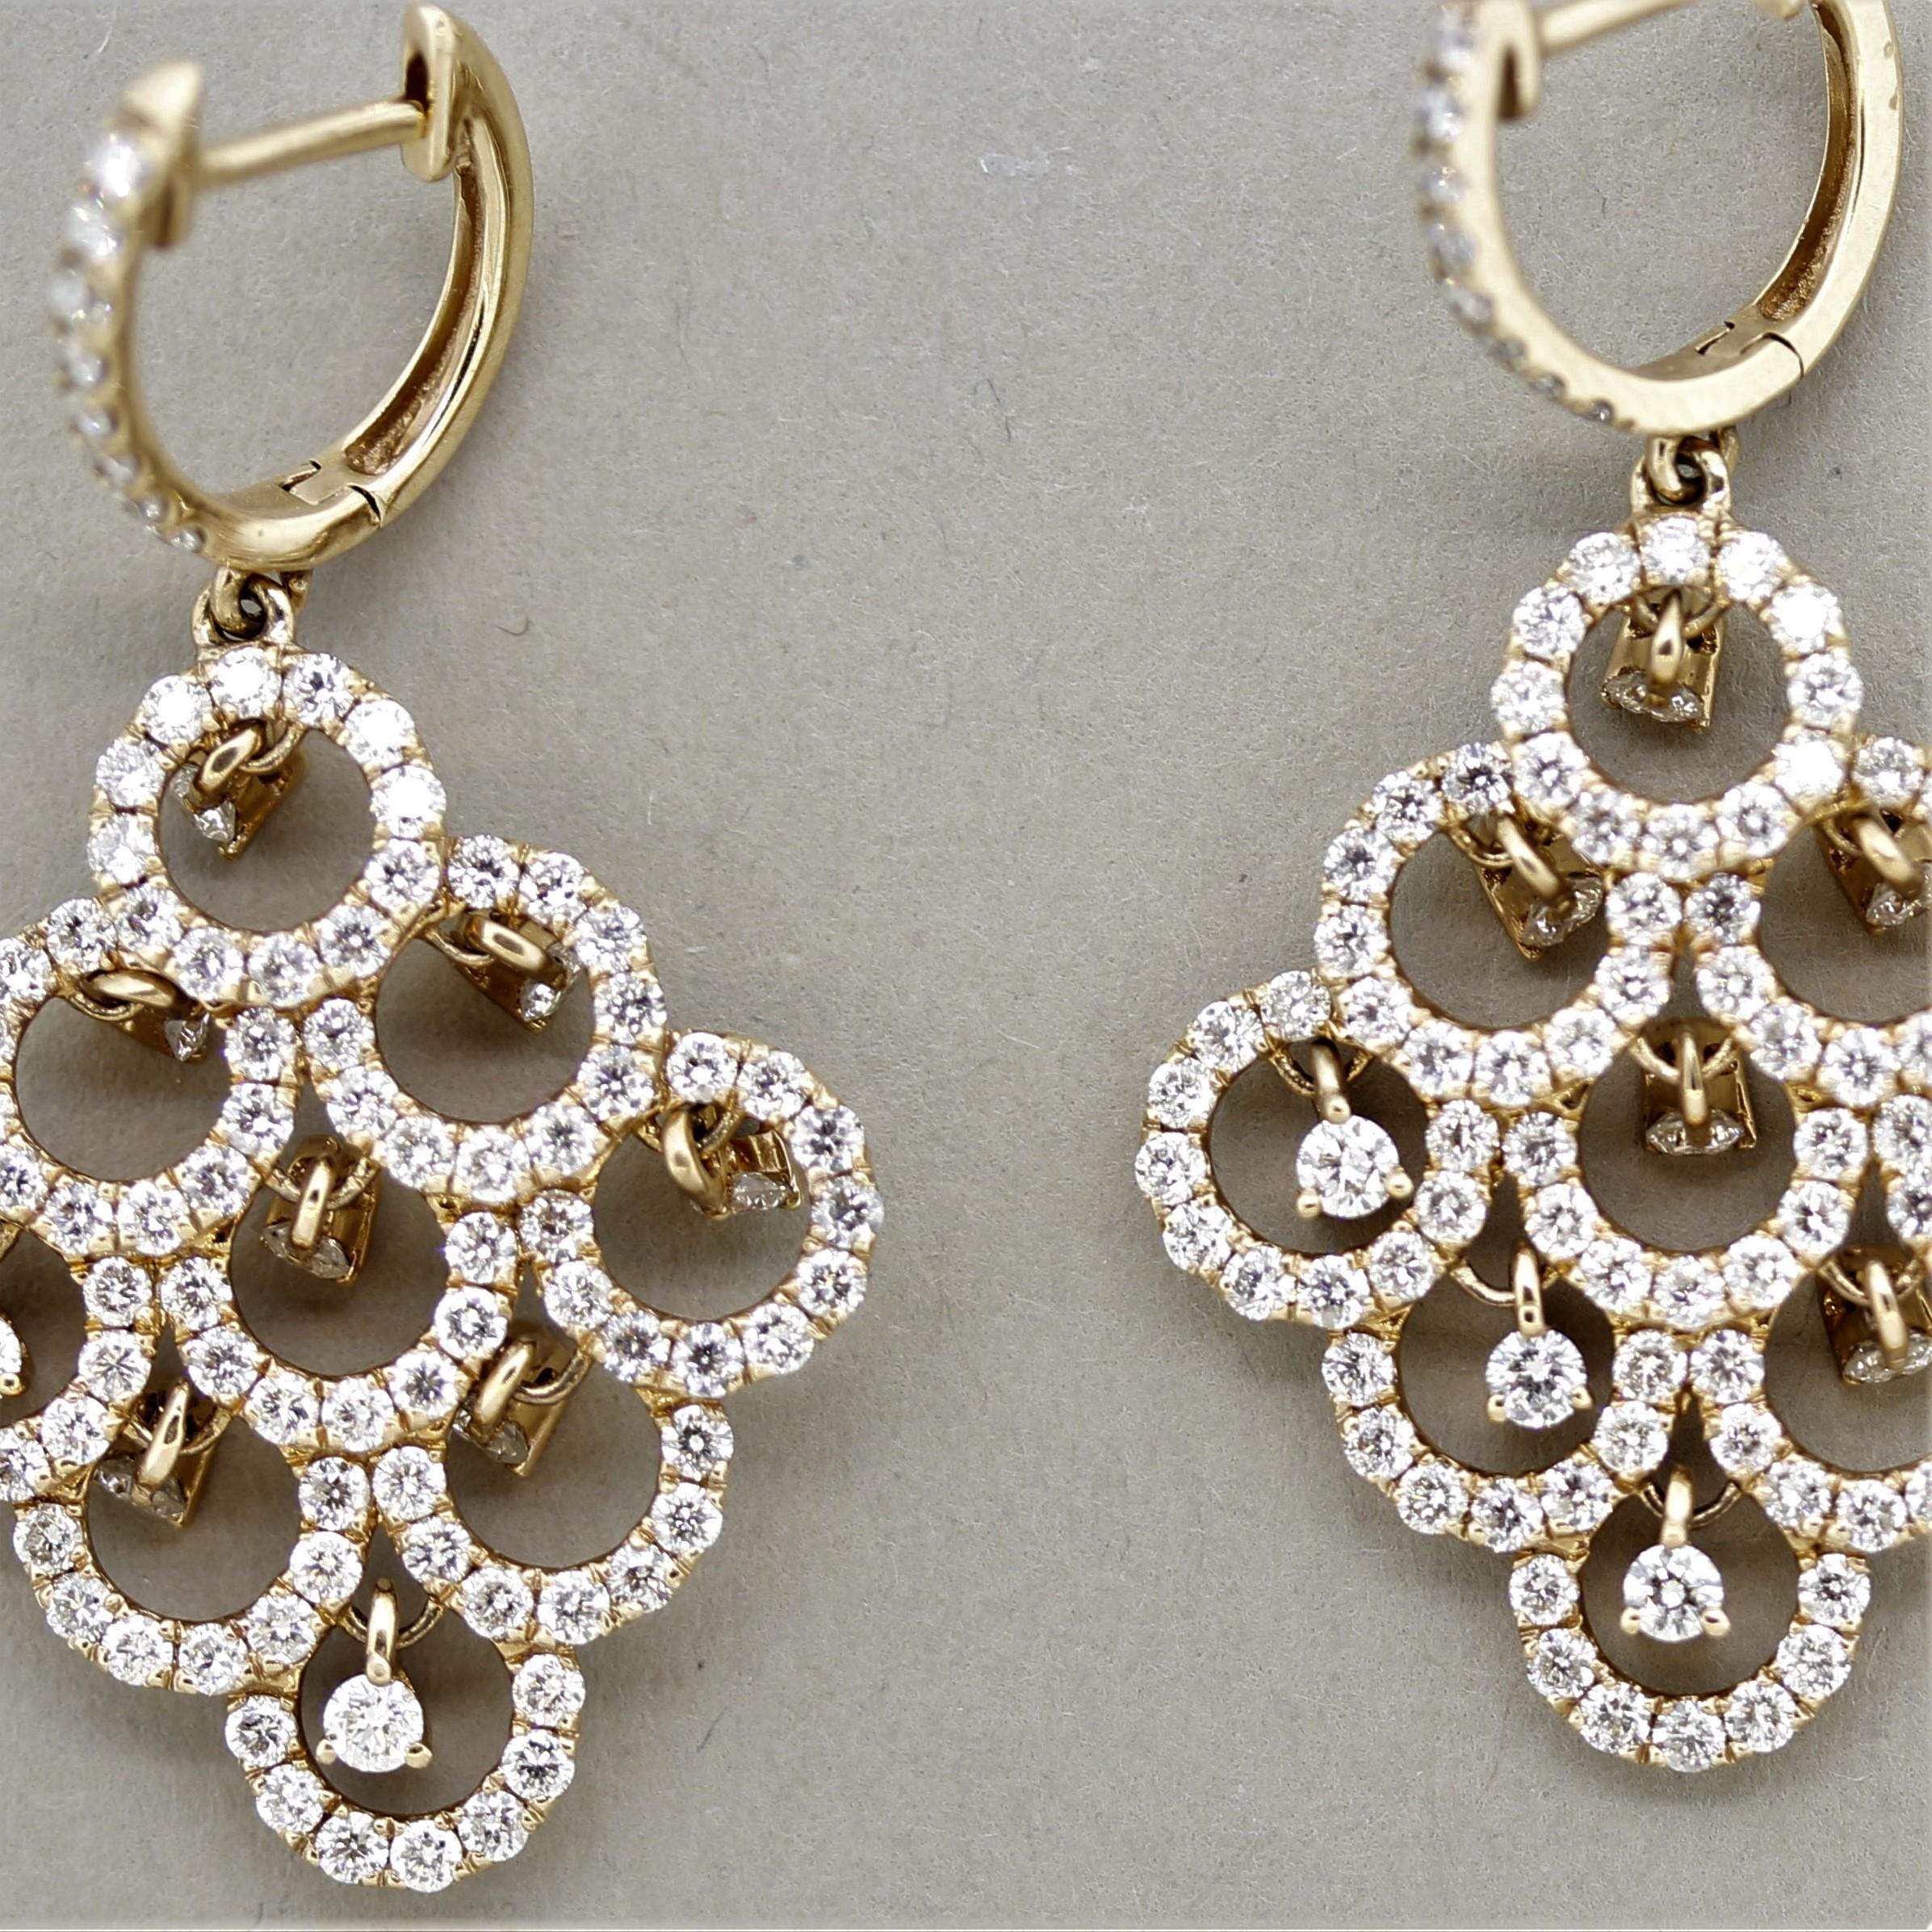 A sweet and stylish pair of diamond chandelier earrings! They feature 3.47 carats of round brilliant-cut diamonds which are set in multiple drops that dangle individually and well as smaller diamonds pave-set around them. Made in 18k rose gold,